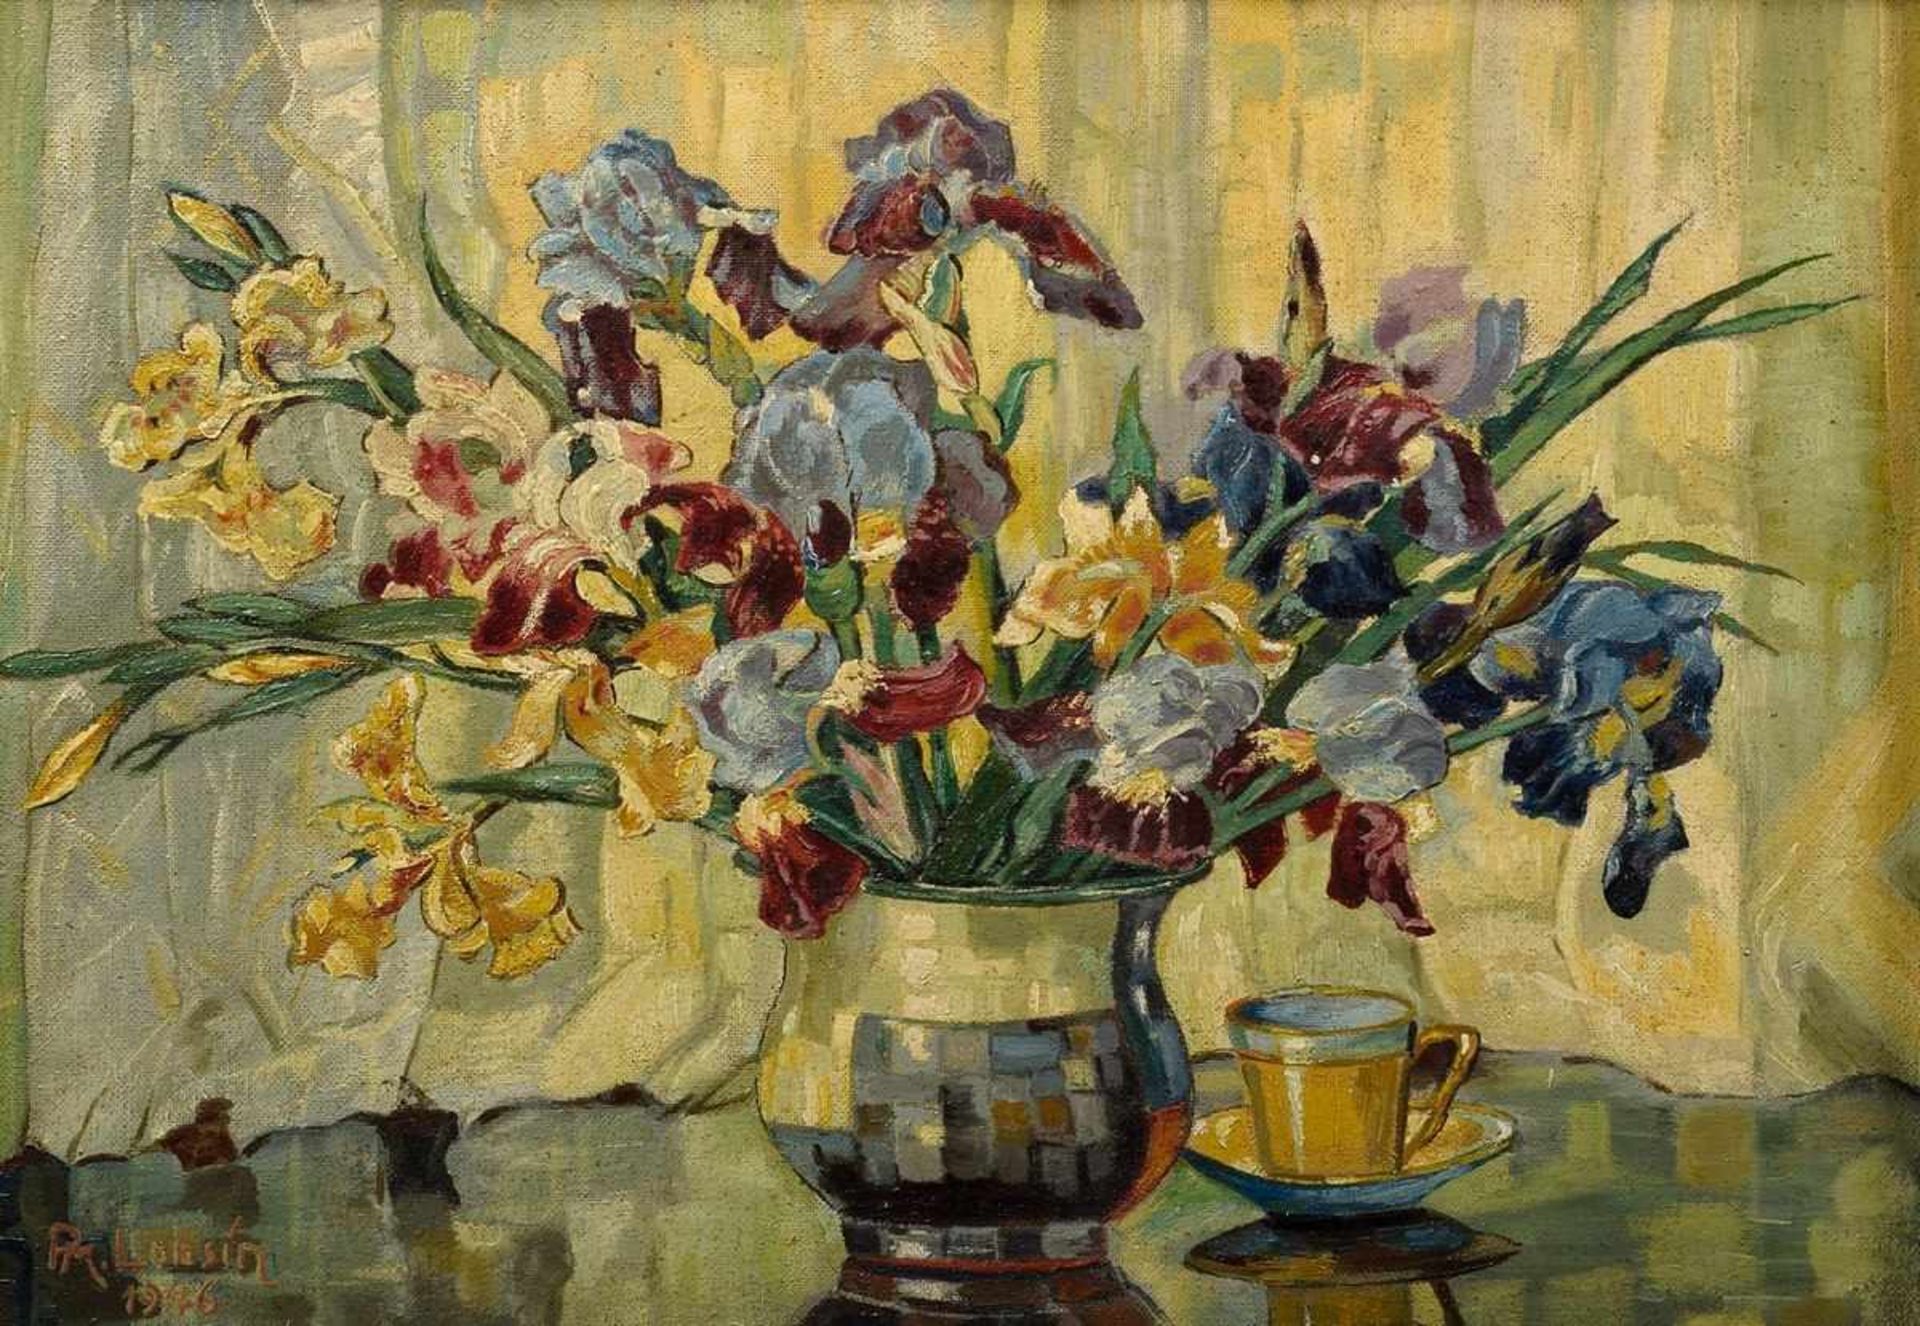 Lobsien, P.M. (painter of the 20th century) "Still life with iris bouquet" 1946, oil/warning sign (